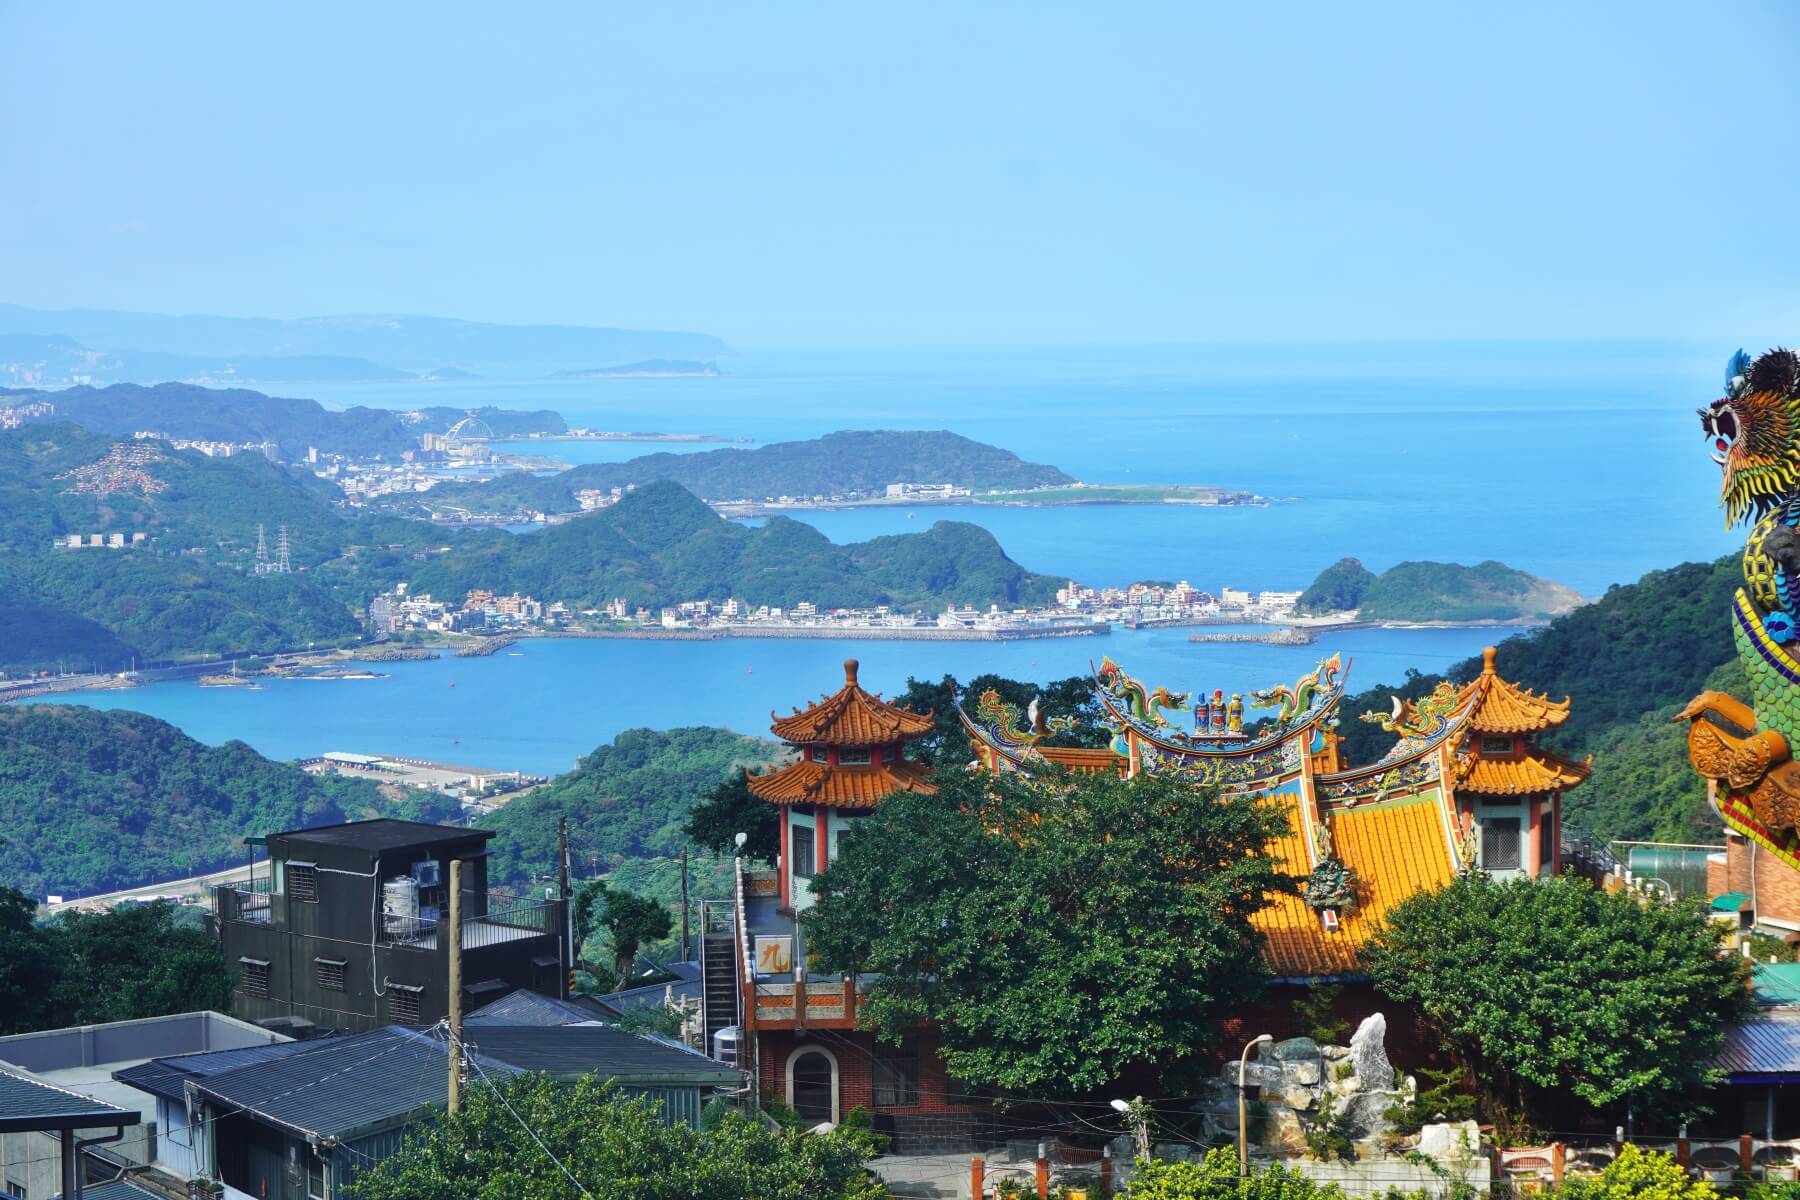 View of the coast from Jiufen, Taiwan